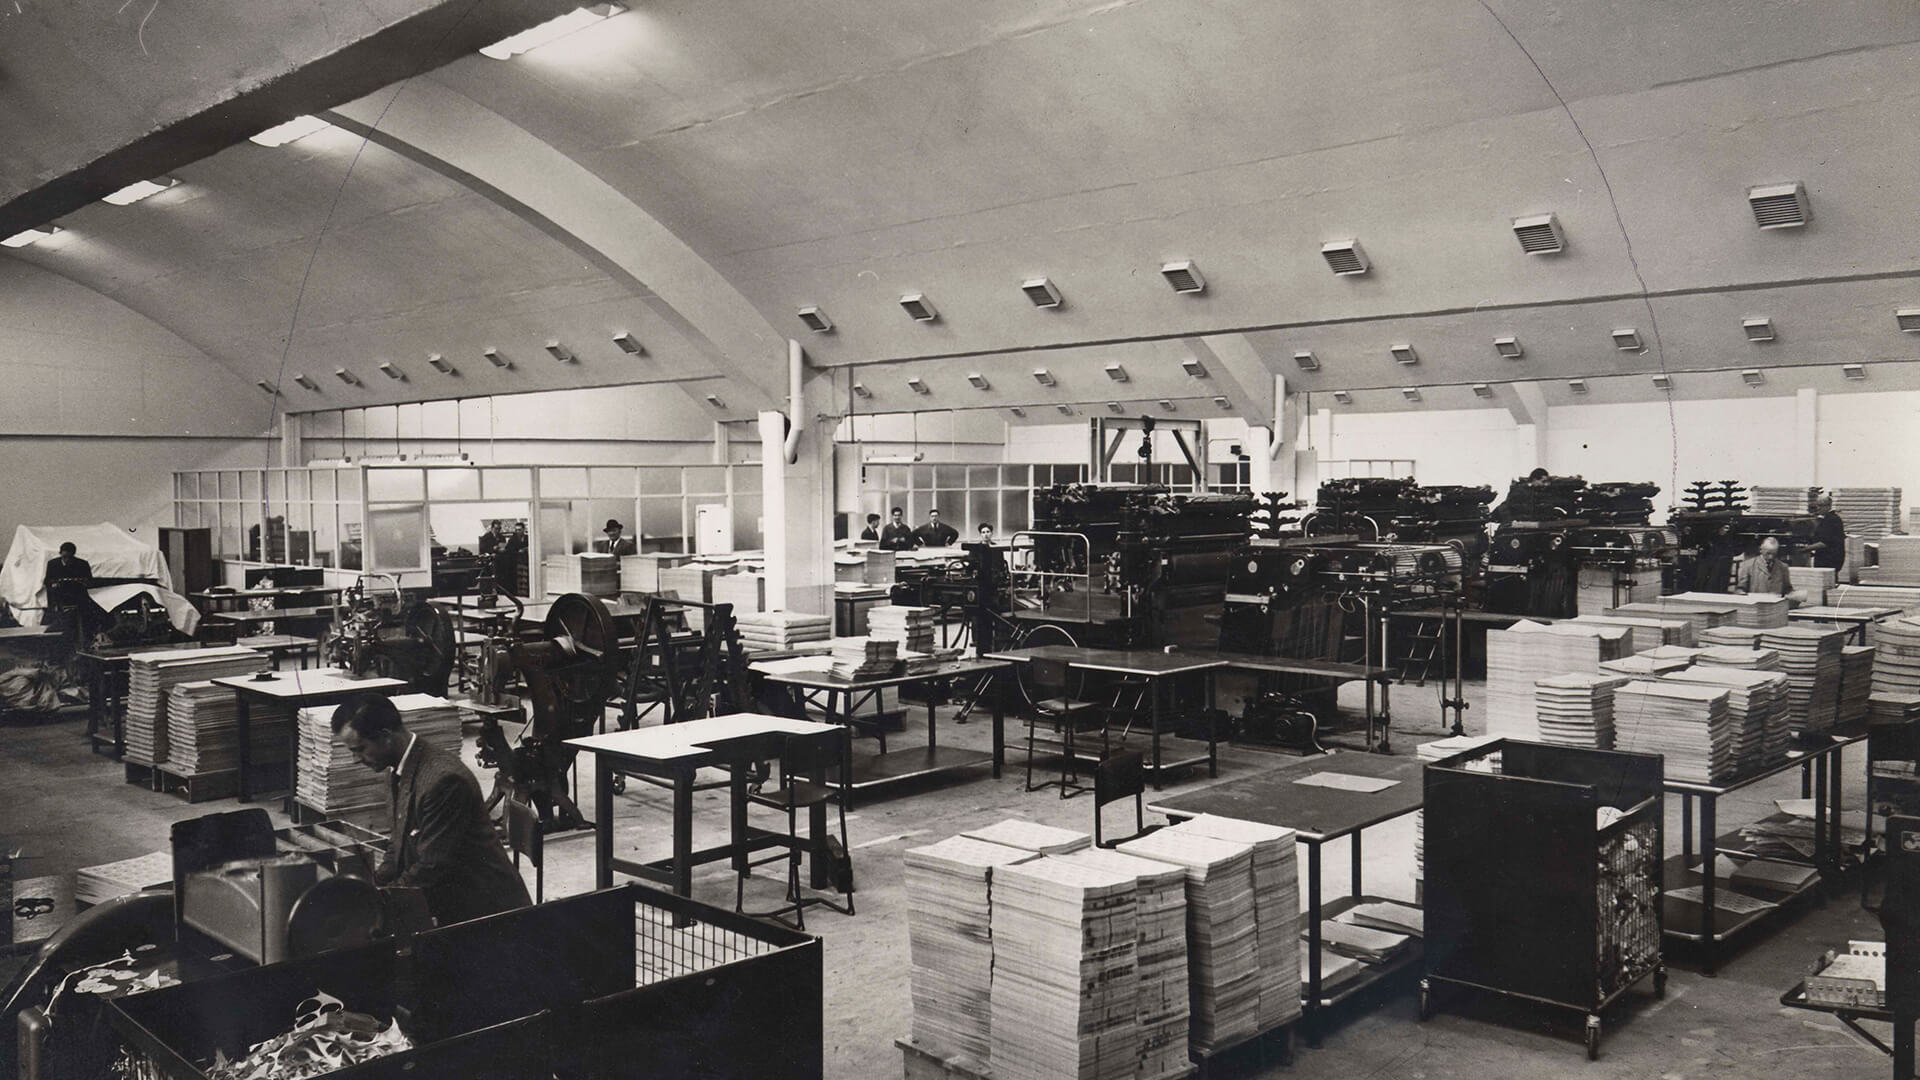 A black-and-white historical shot of the Guinness Printworks interior showing stacks of paper and machinery in a large, open space